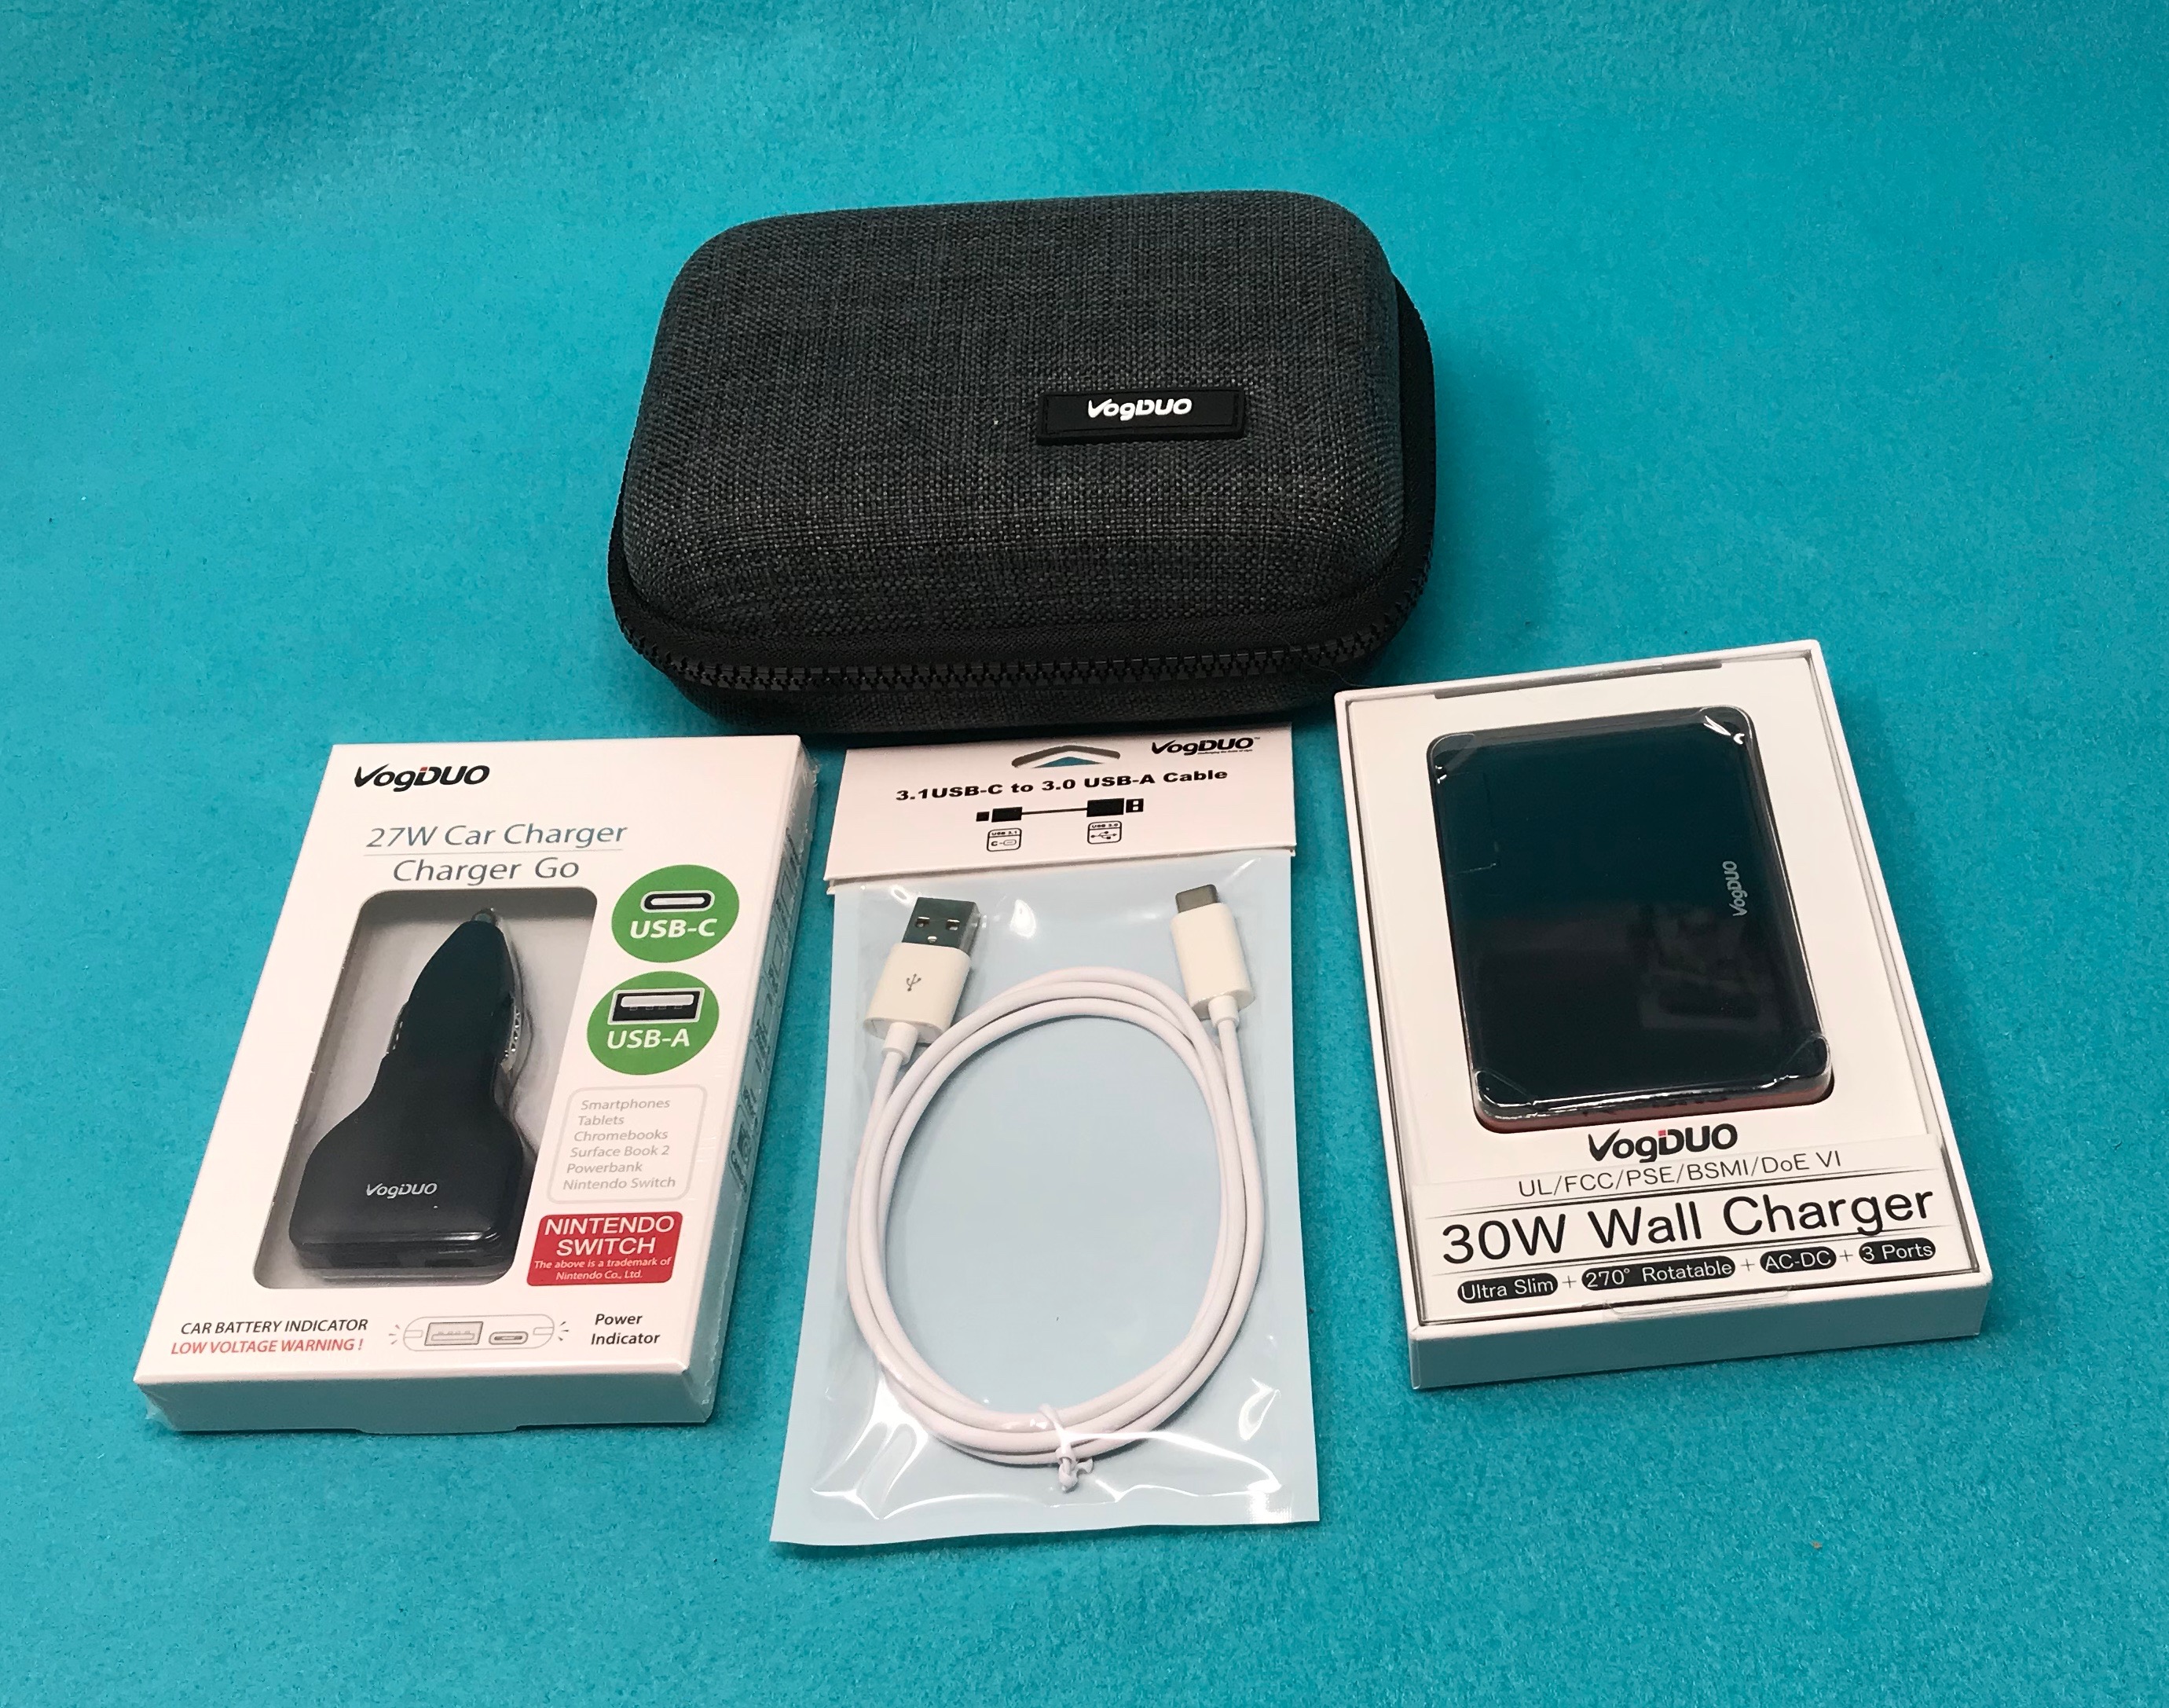 VogDUO Travel kit review - The Gadgeteer